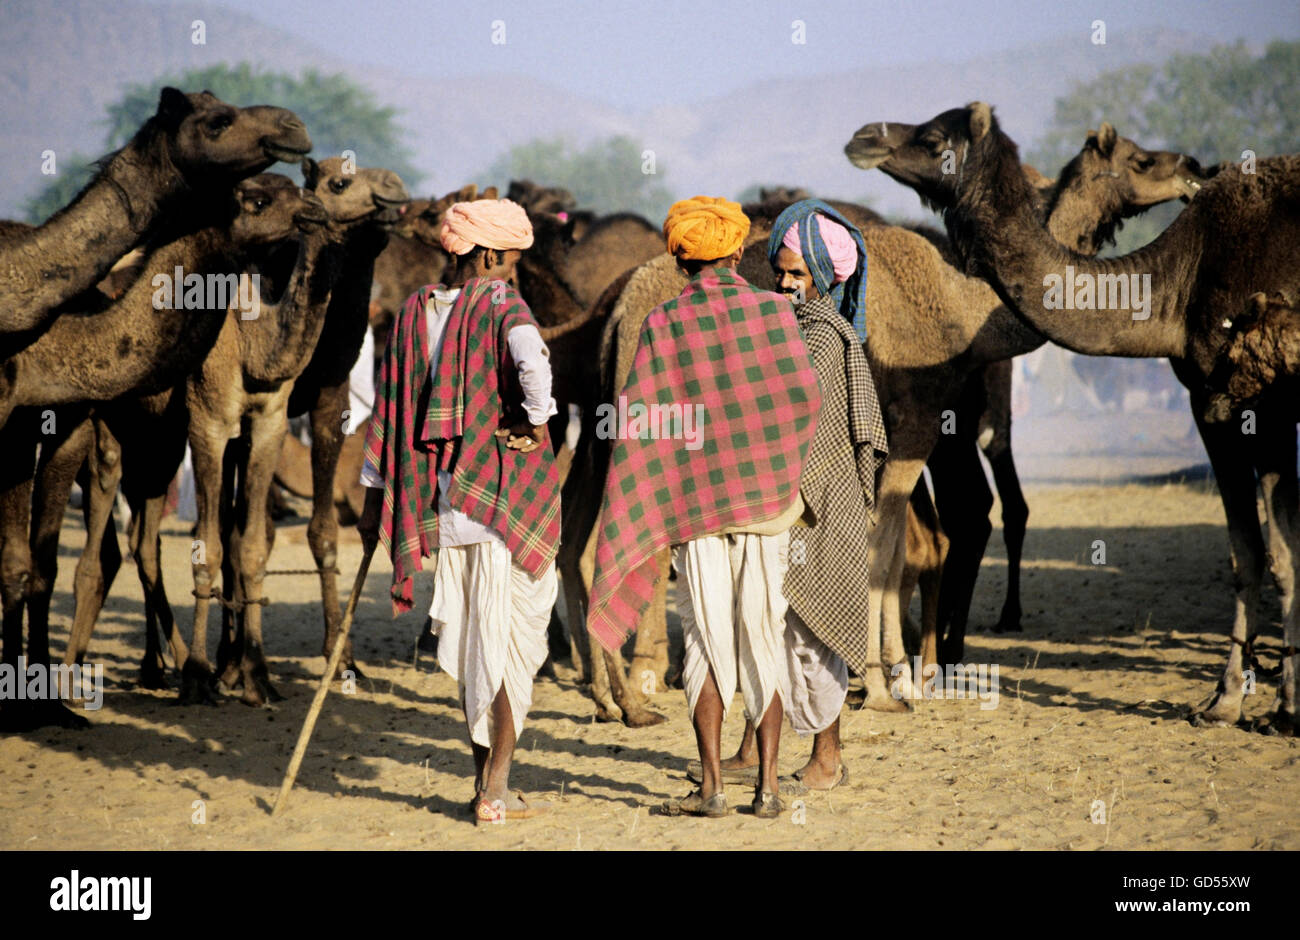 Camel herders and their camels Stock Photo